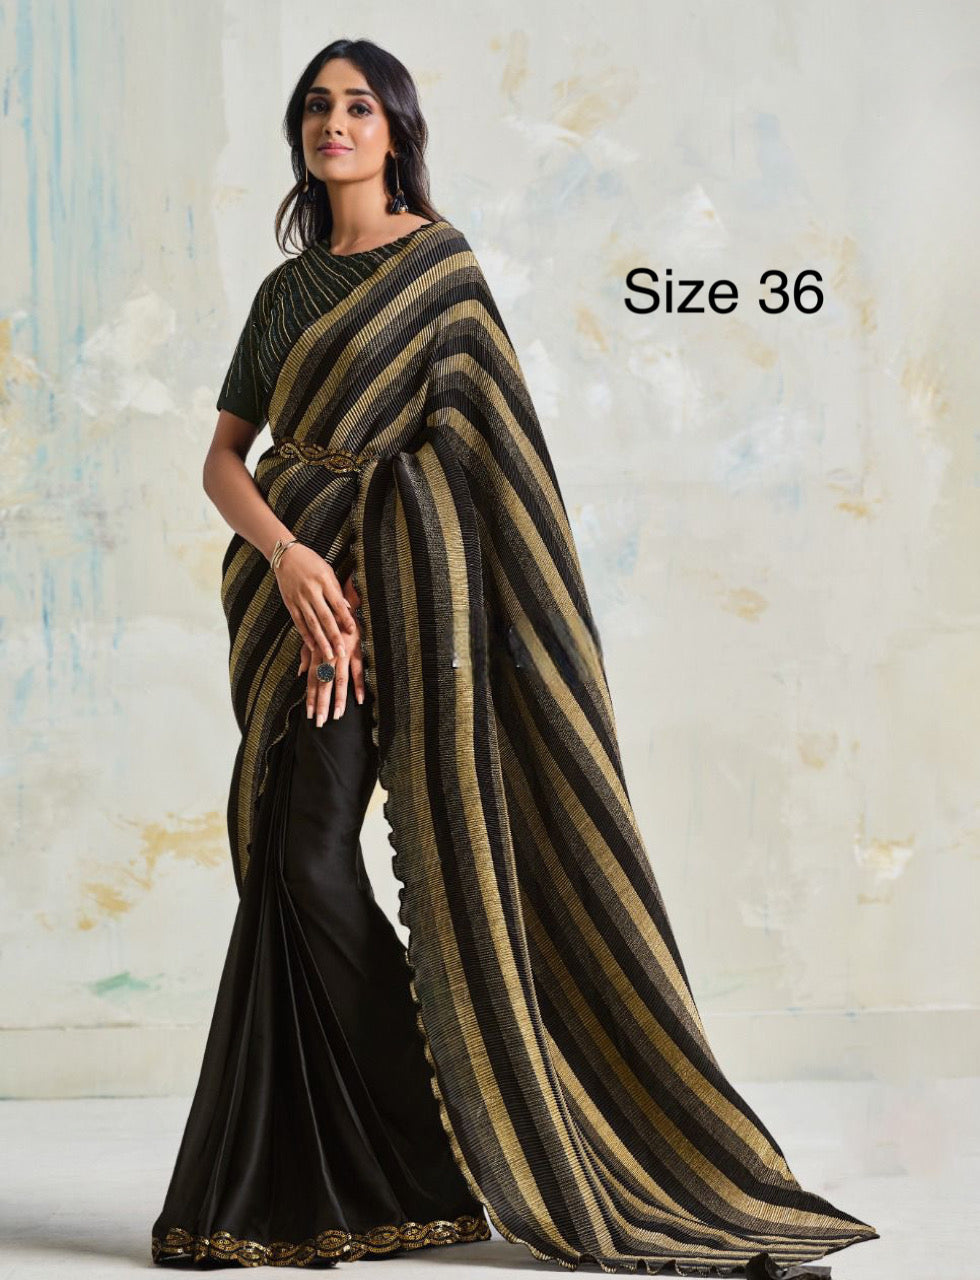 Designer Saree with Stitched Blouse size 36